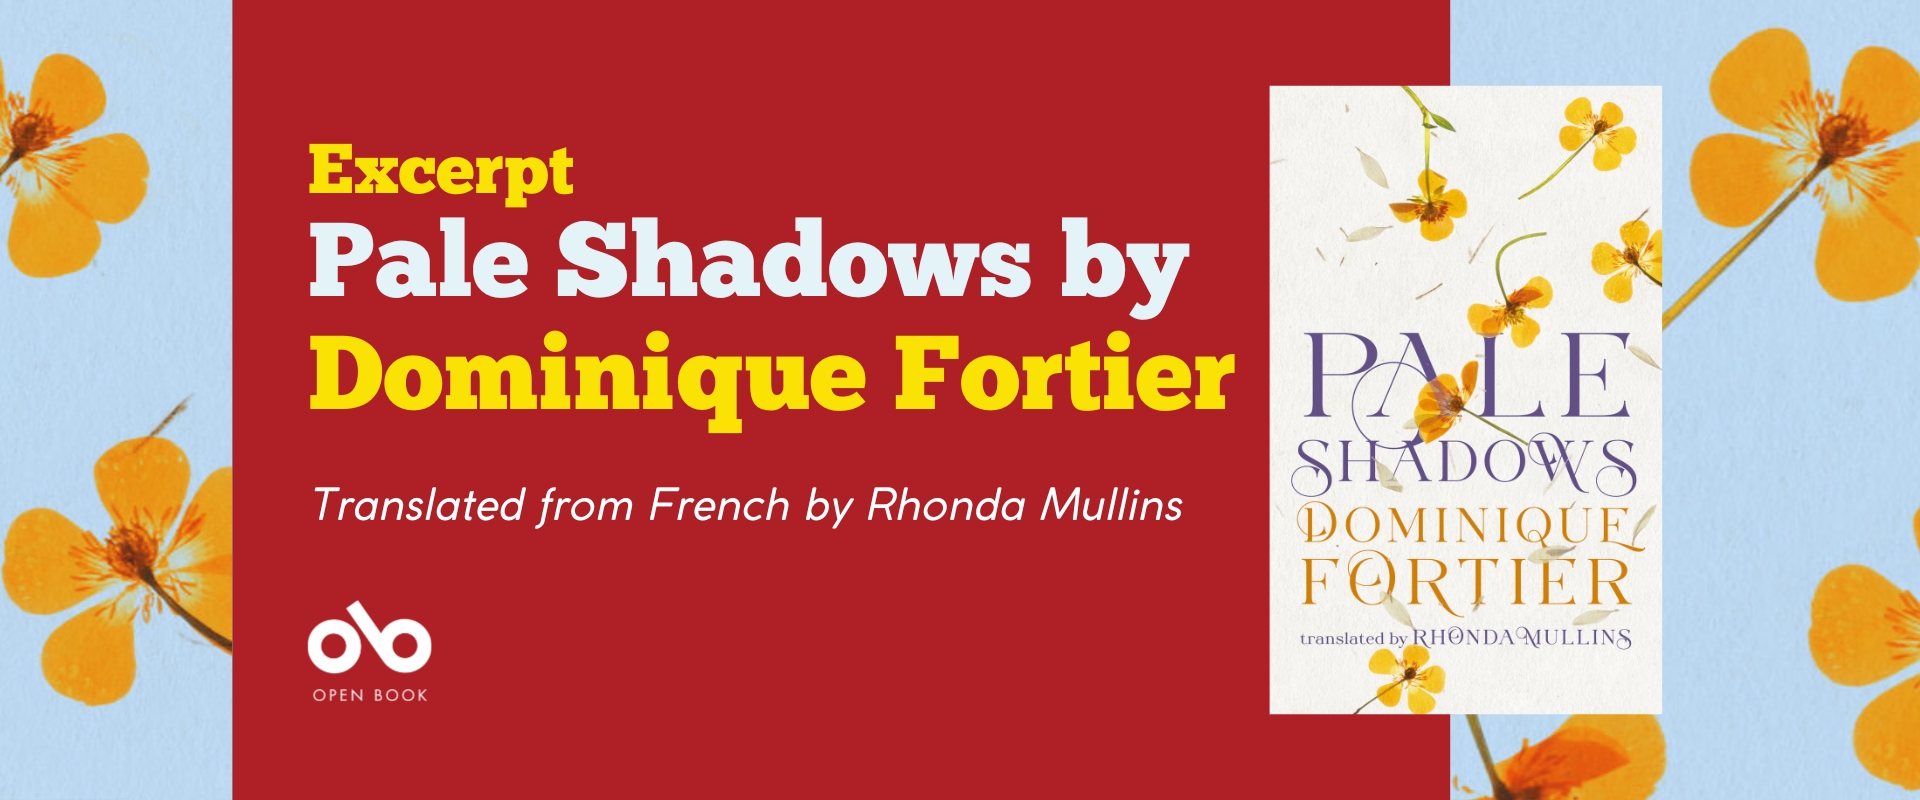 A banner for an excerpt from the novel Pale Shadows by Dominique Fortier, translated by Rhonda Mullins, text on a red background and bordered by yellow flowers with the cover of the novel included.